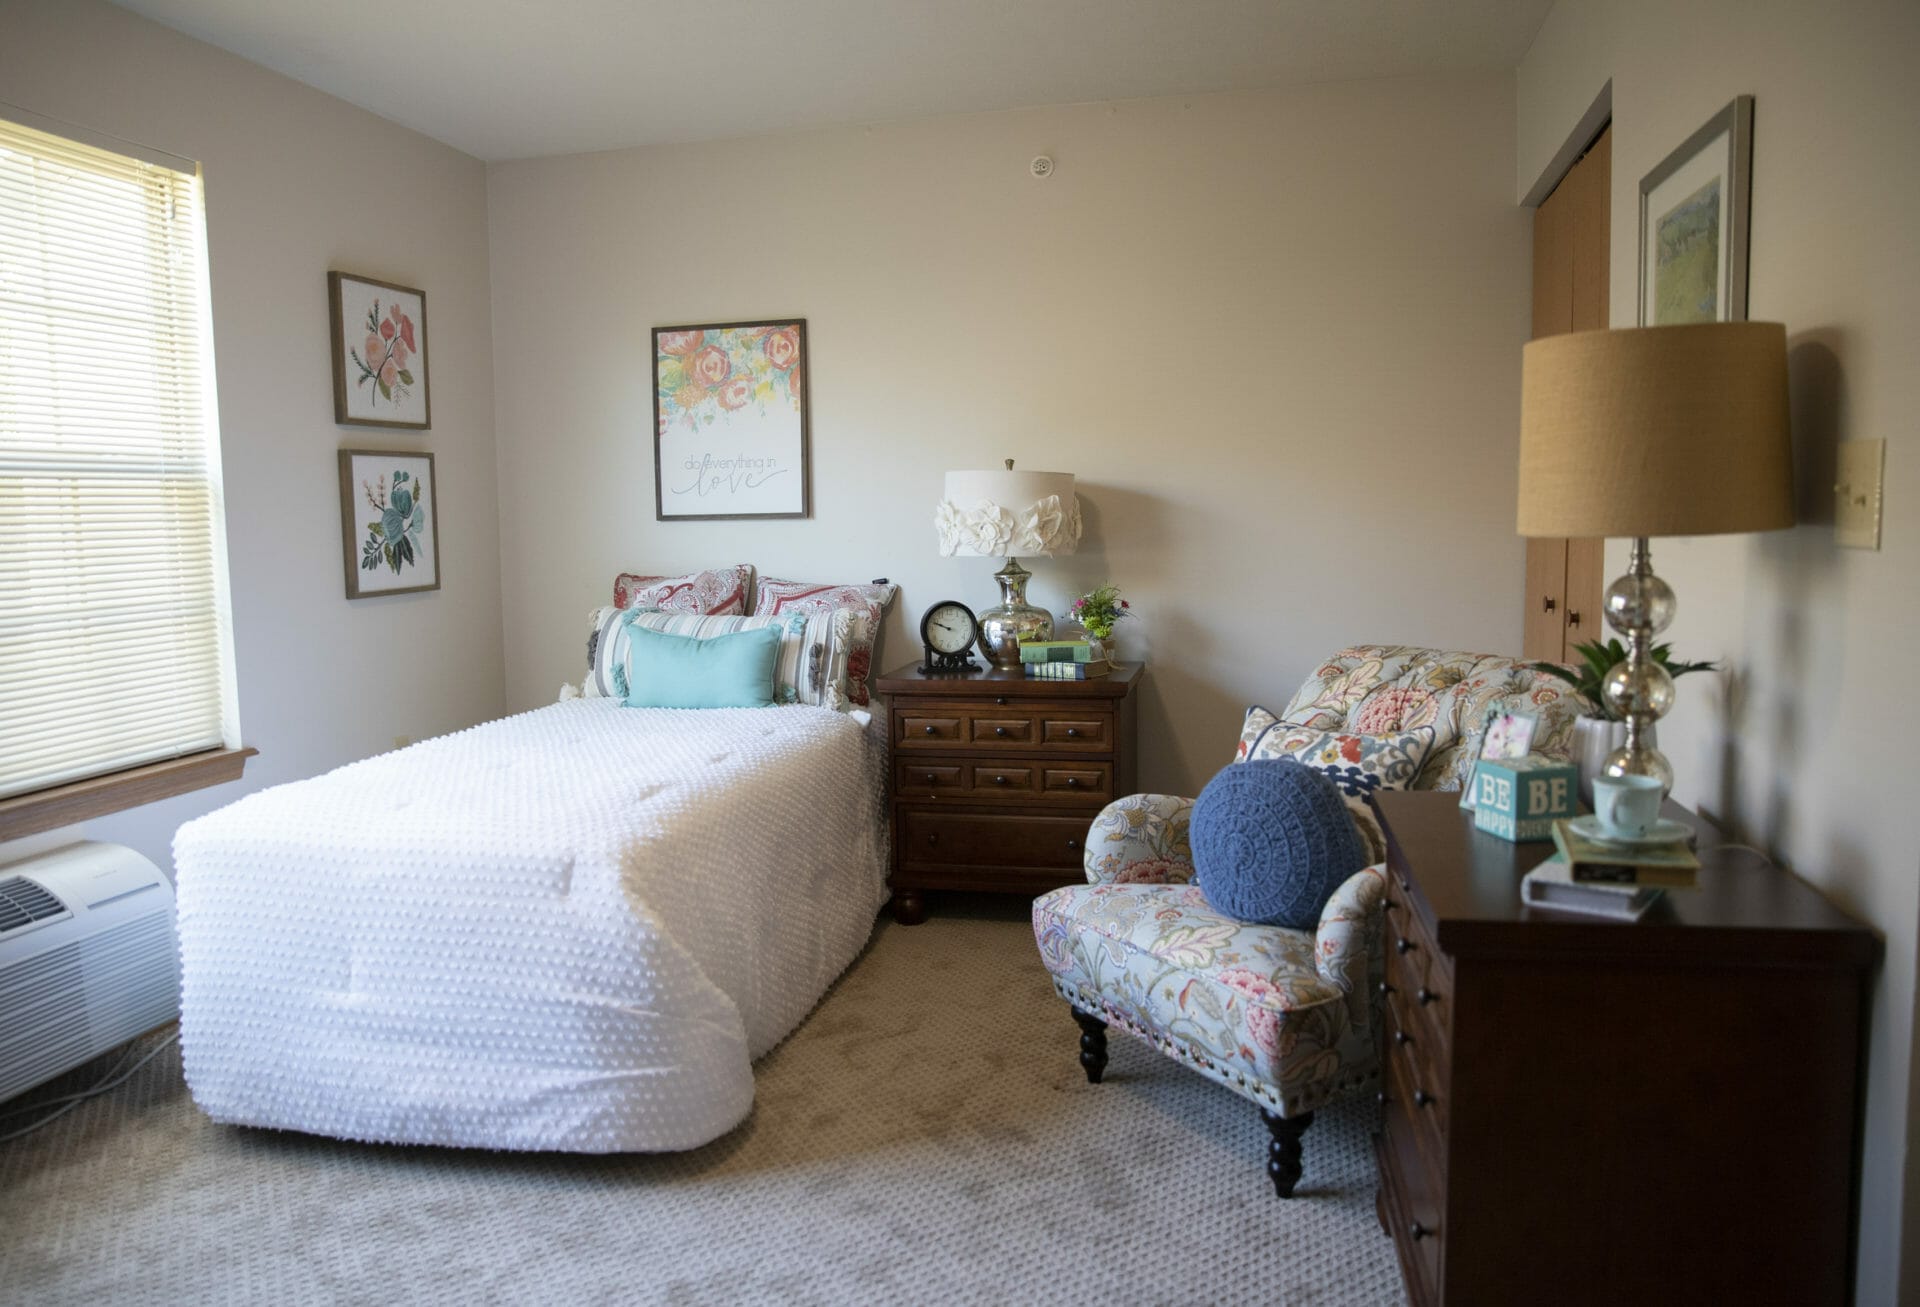 <span  class="uc_style_uc_tiles_grid_image_elementor_uc_items_attribute_title" style="color:#000000;">Bed in the studio apartment at Brownsburg Meadows Assisted Living. </span>